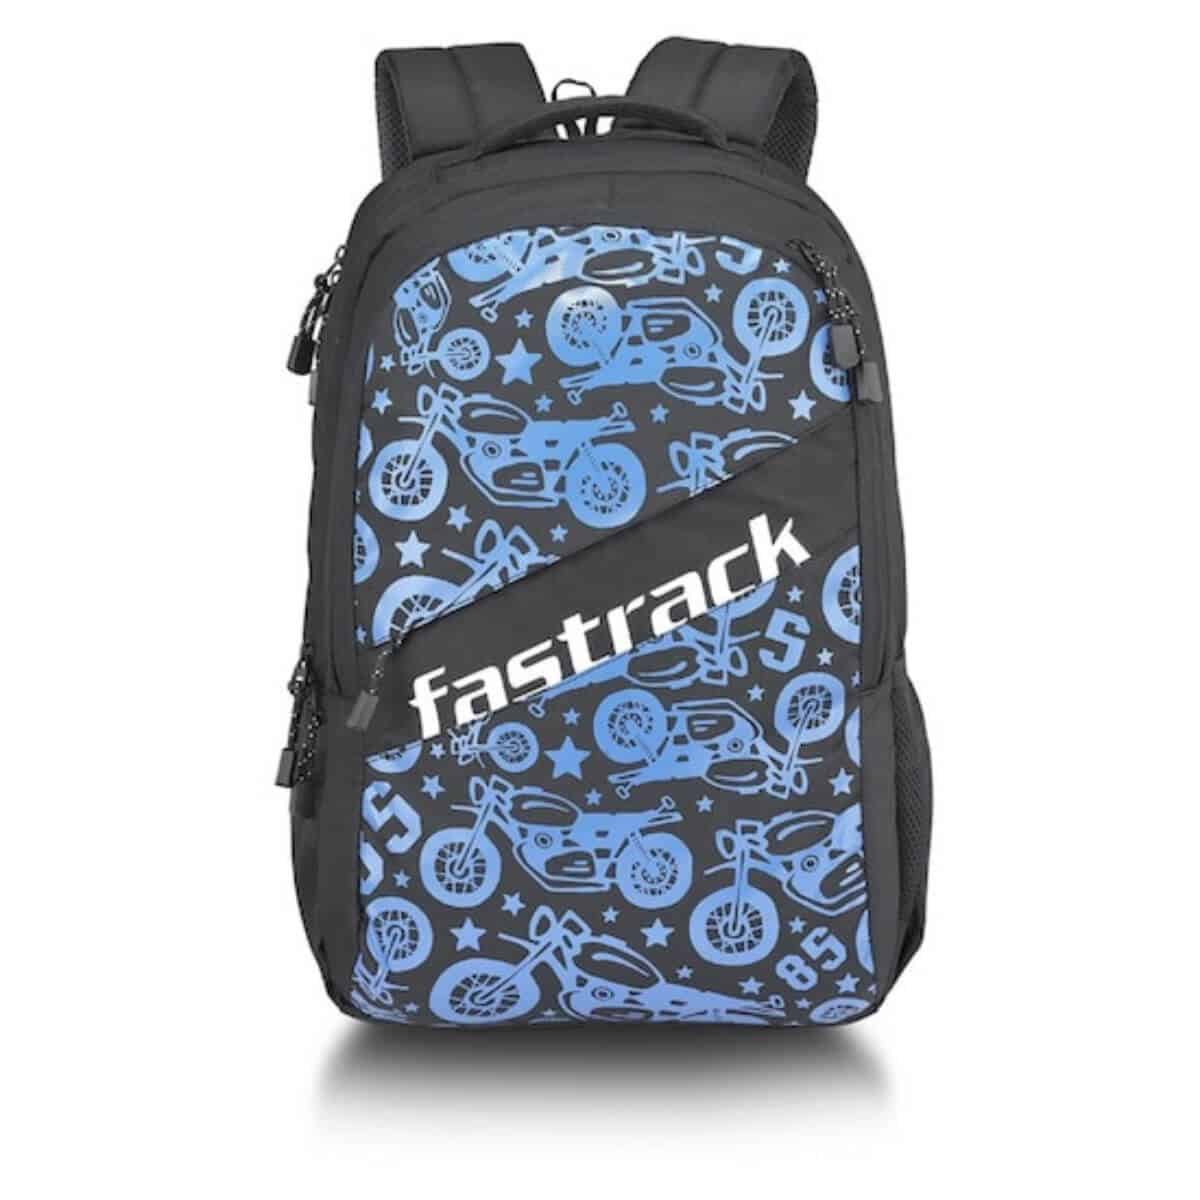 Buy Fastrack Pink Casual Sling Bag for Women at Amazon.in